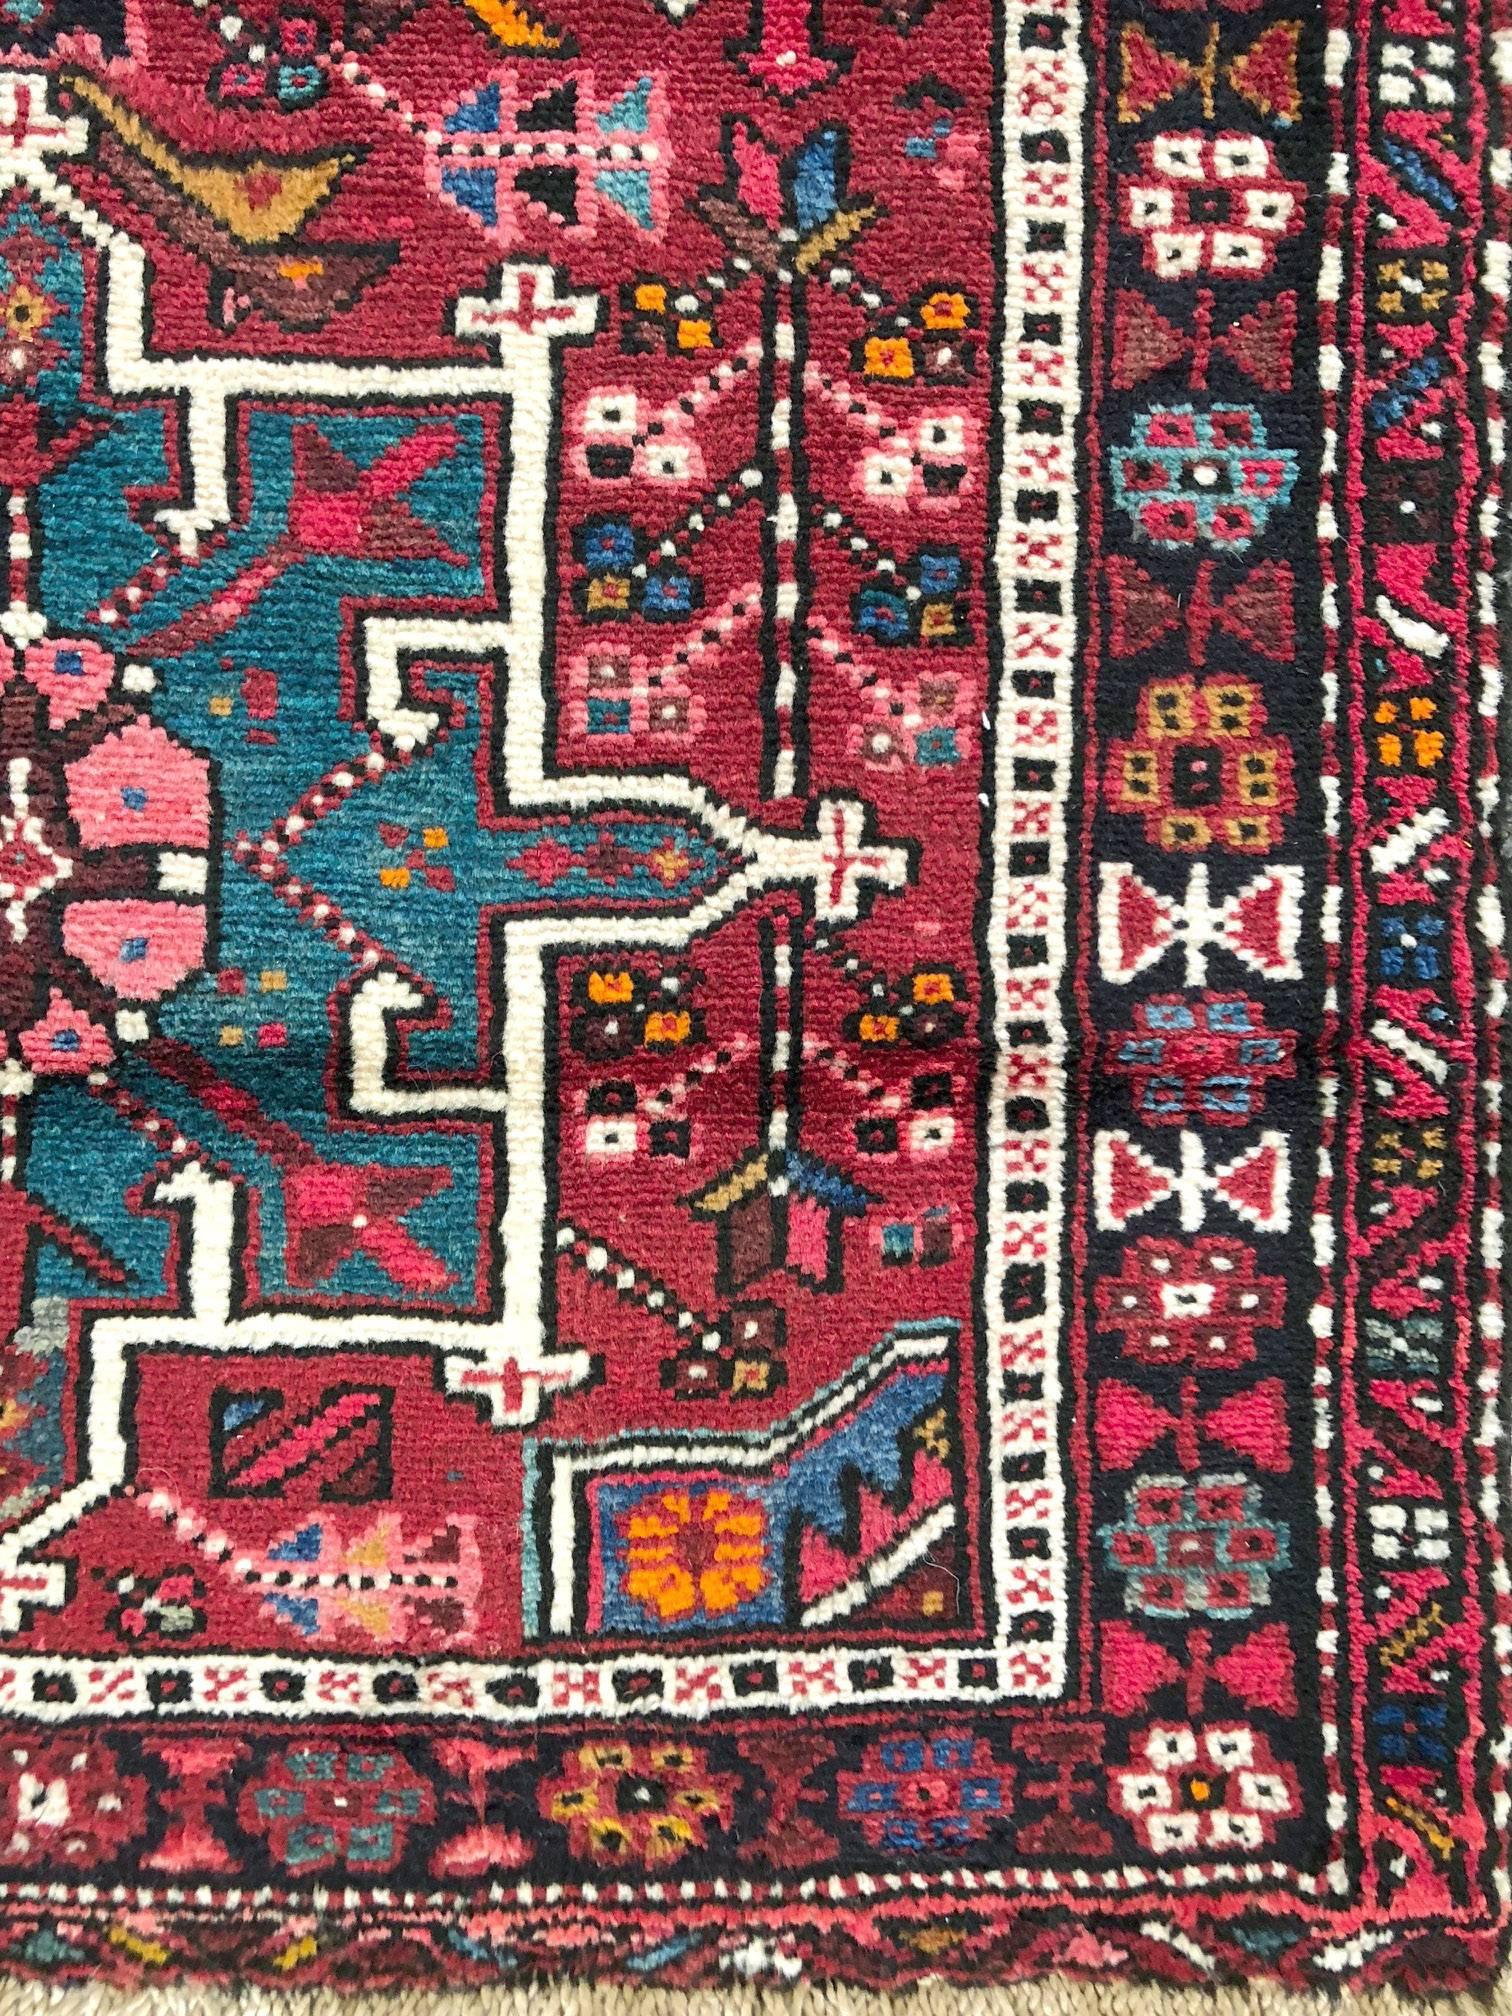 This piece has wool pile and cotton foundation. The base color is rust with black and multi-color border. This piece is in a great condition. The design is tribal and it has repeated medallions. Karajeh rugs get better when they age.